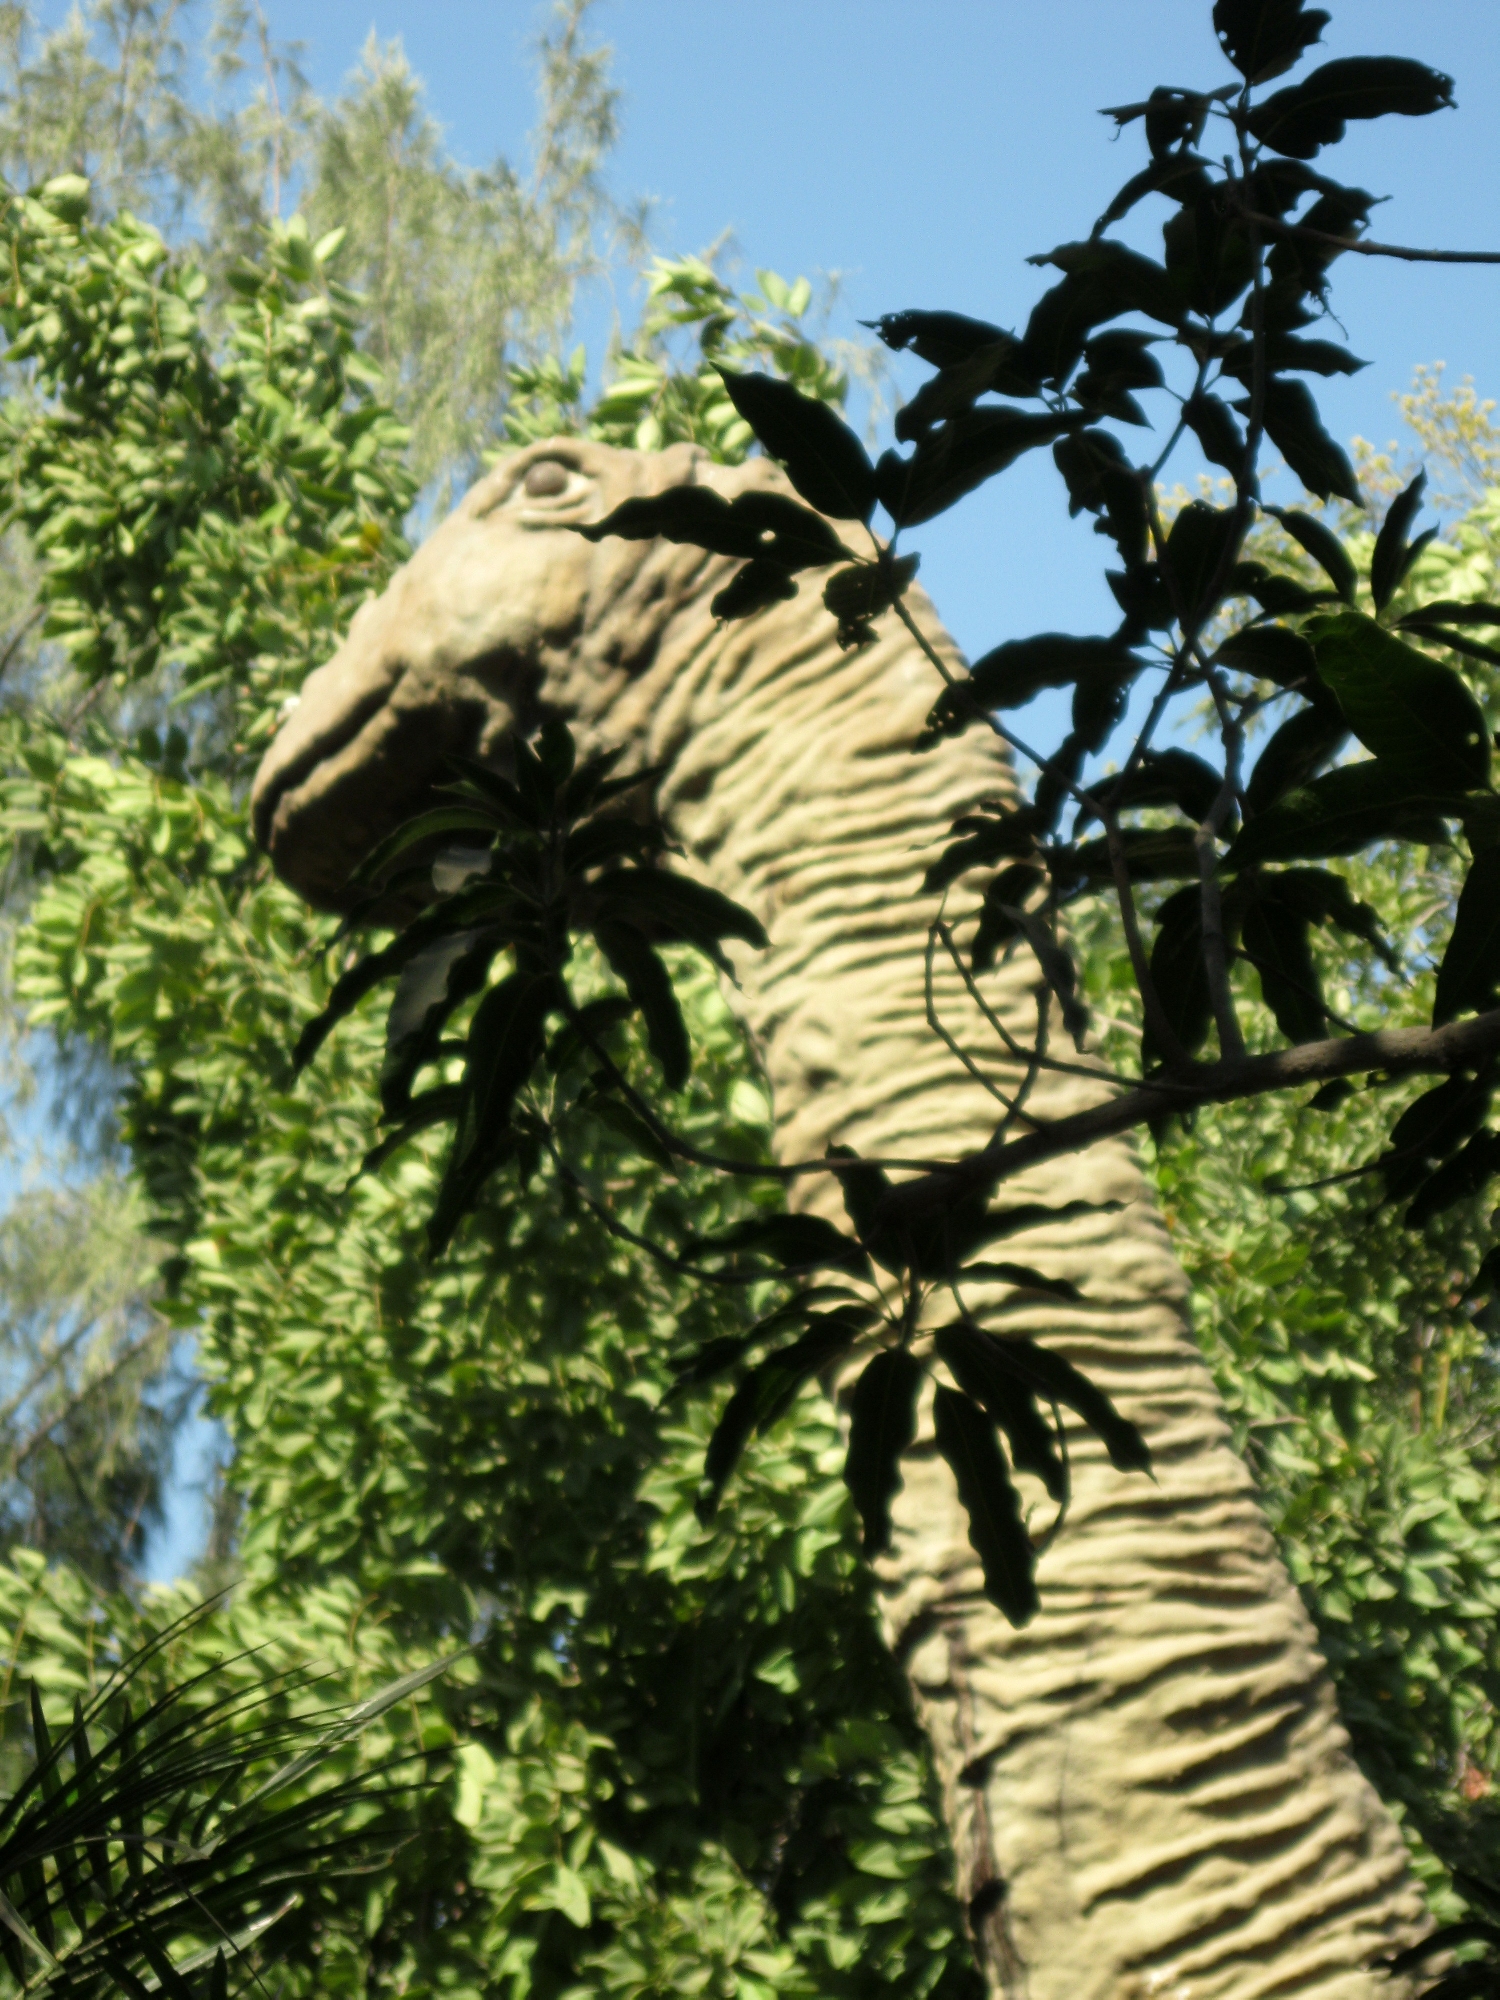 a toy dinosaur in a forest with green trees